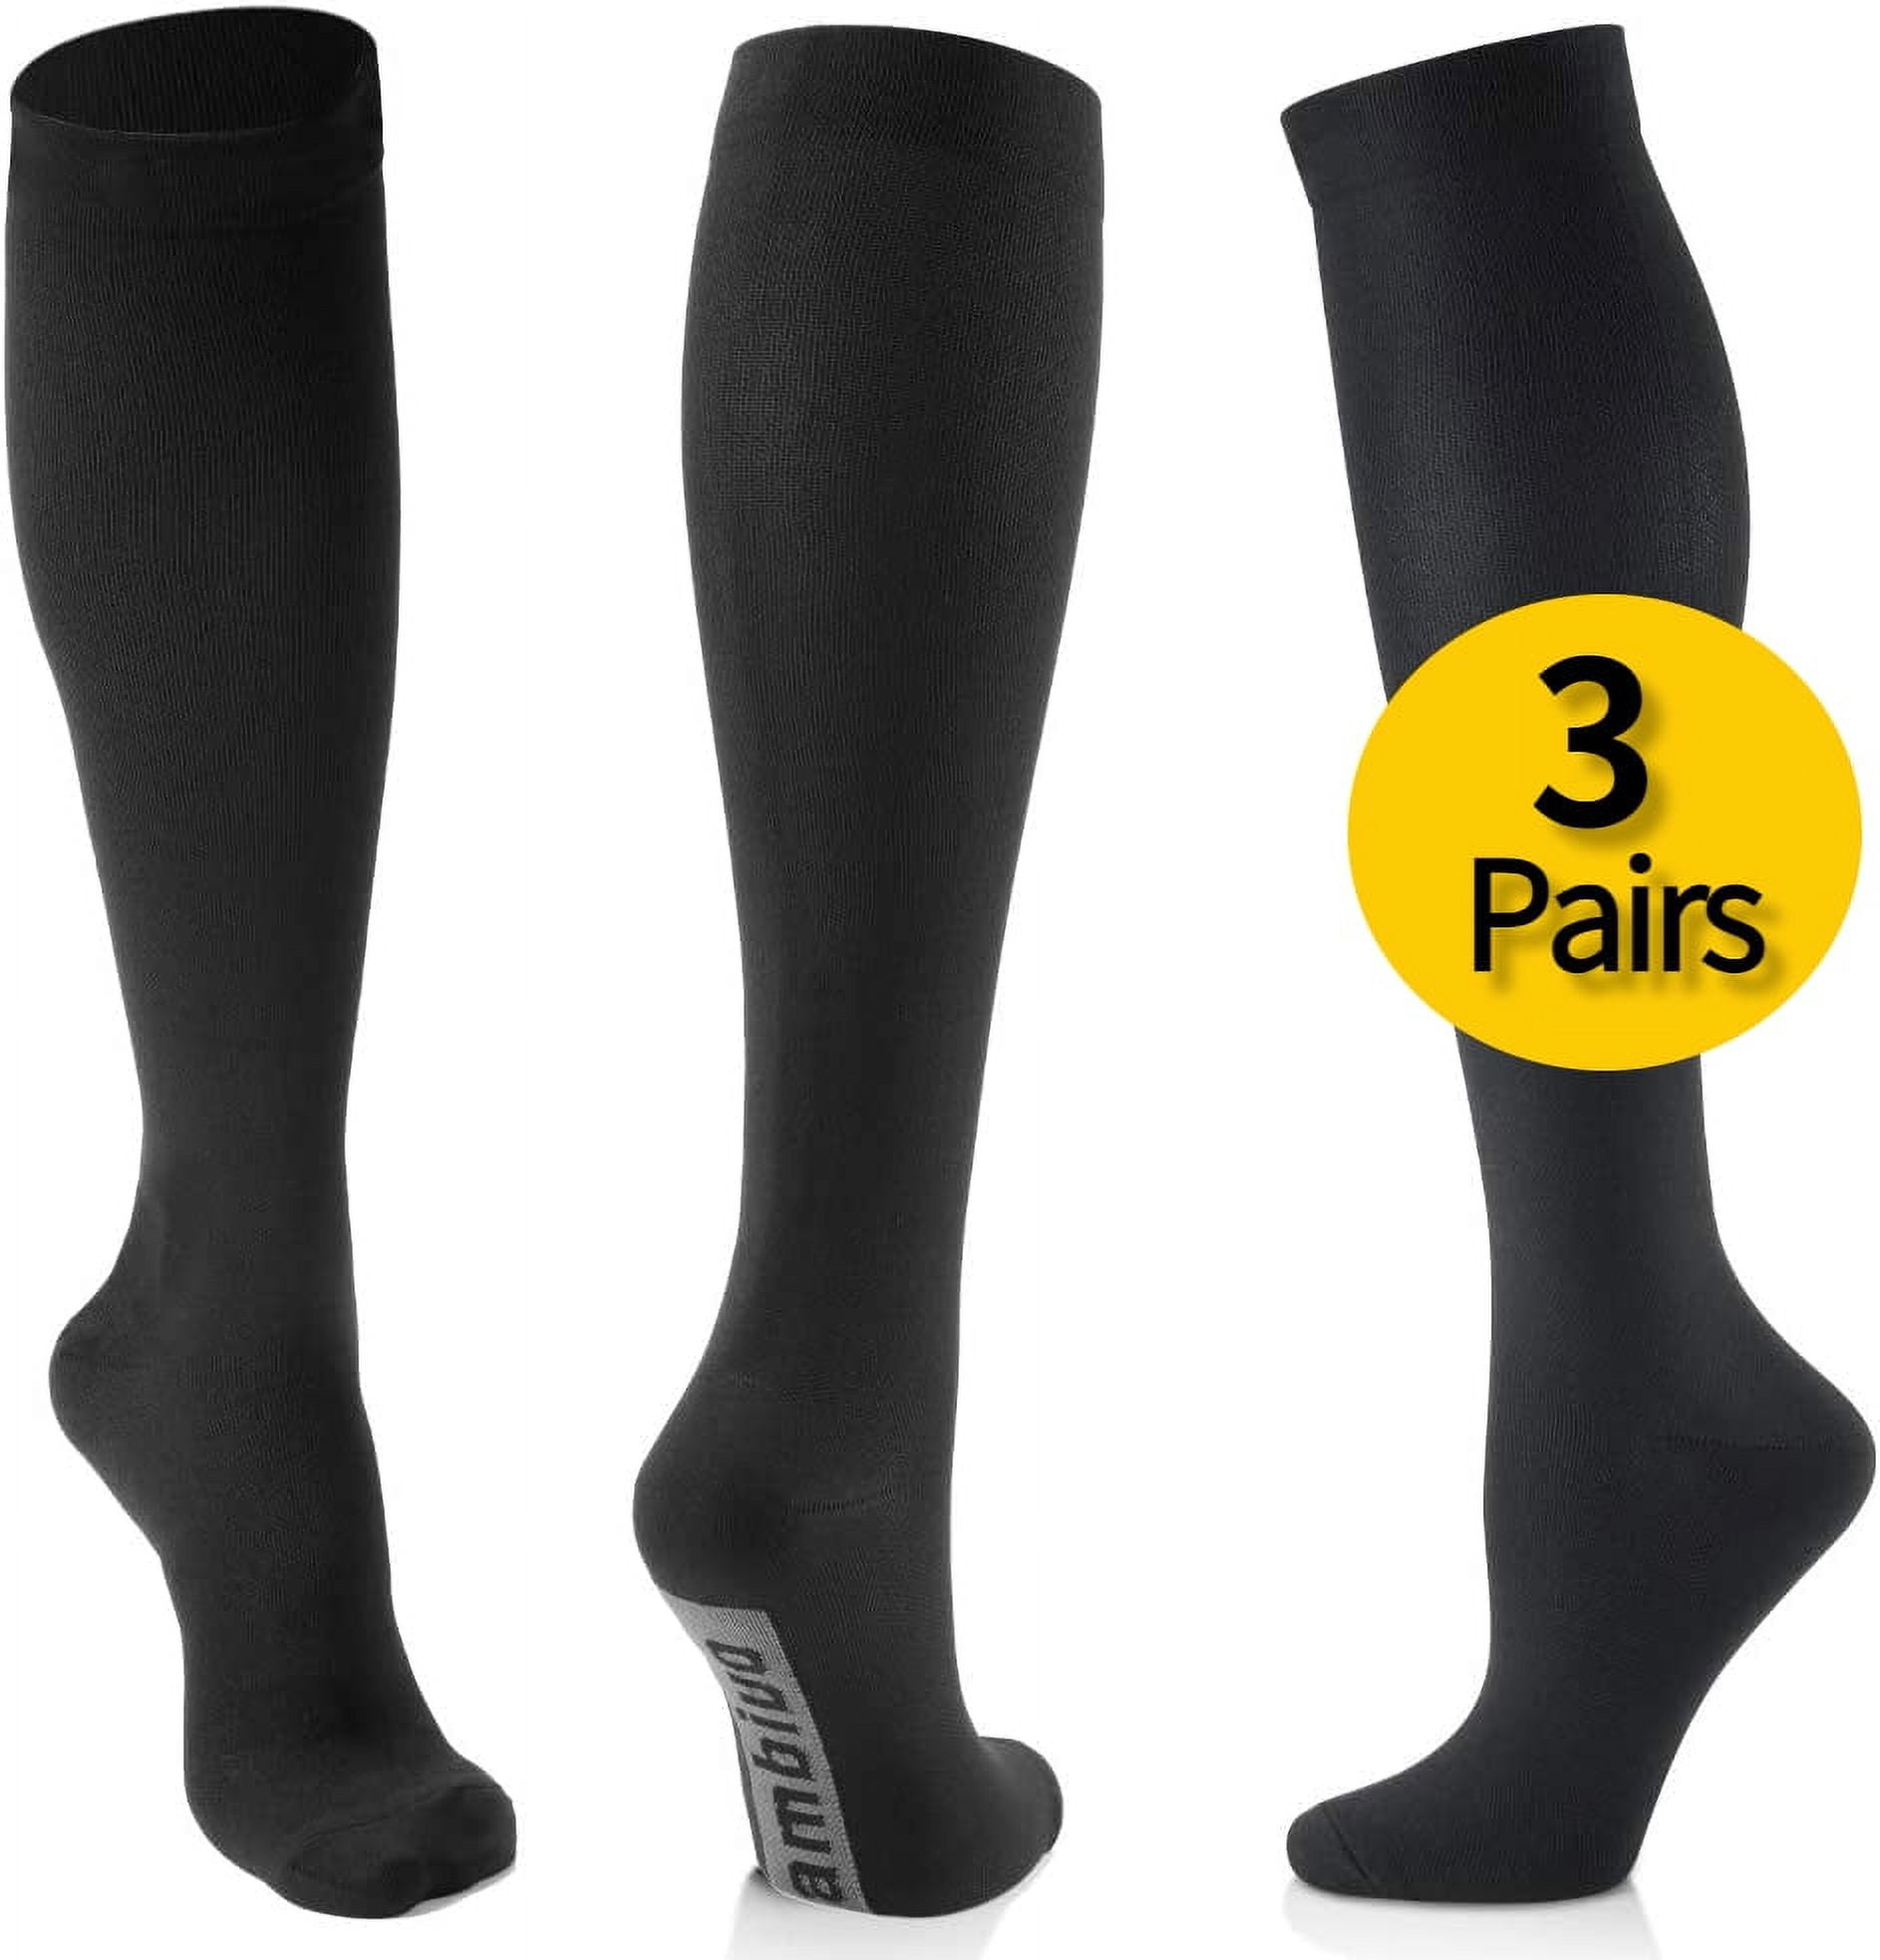 Best Deal for CAMBIVO 3 Pairs Compression Socks for Women Men, Fit